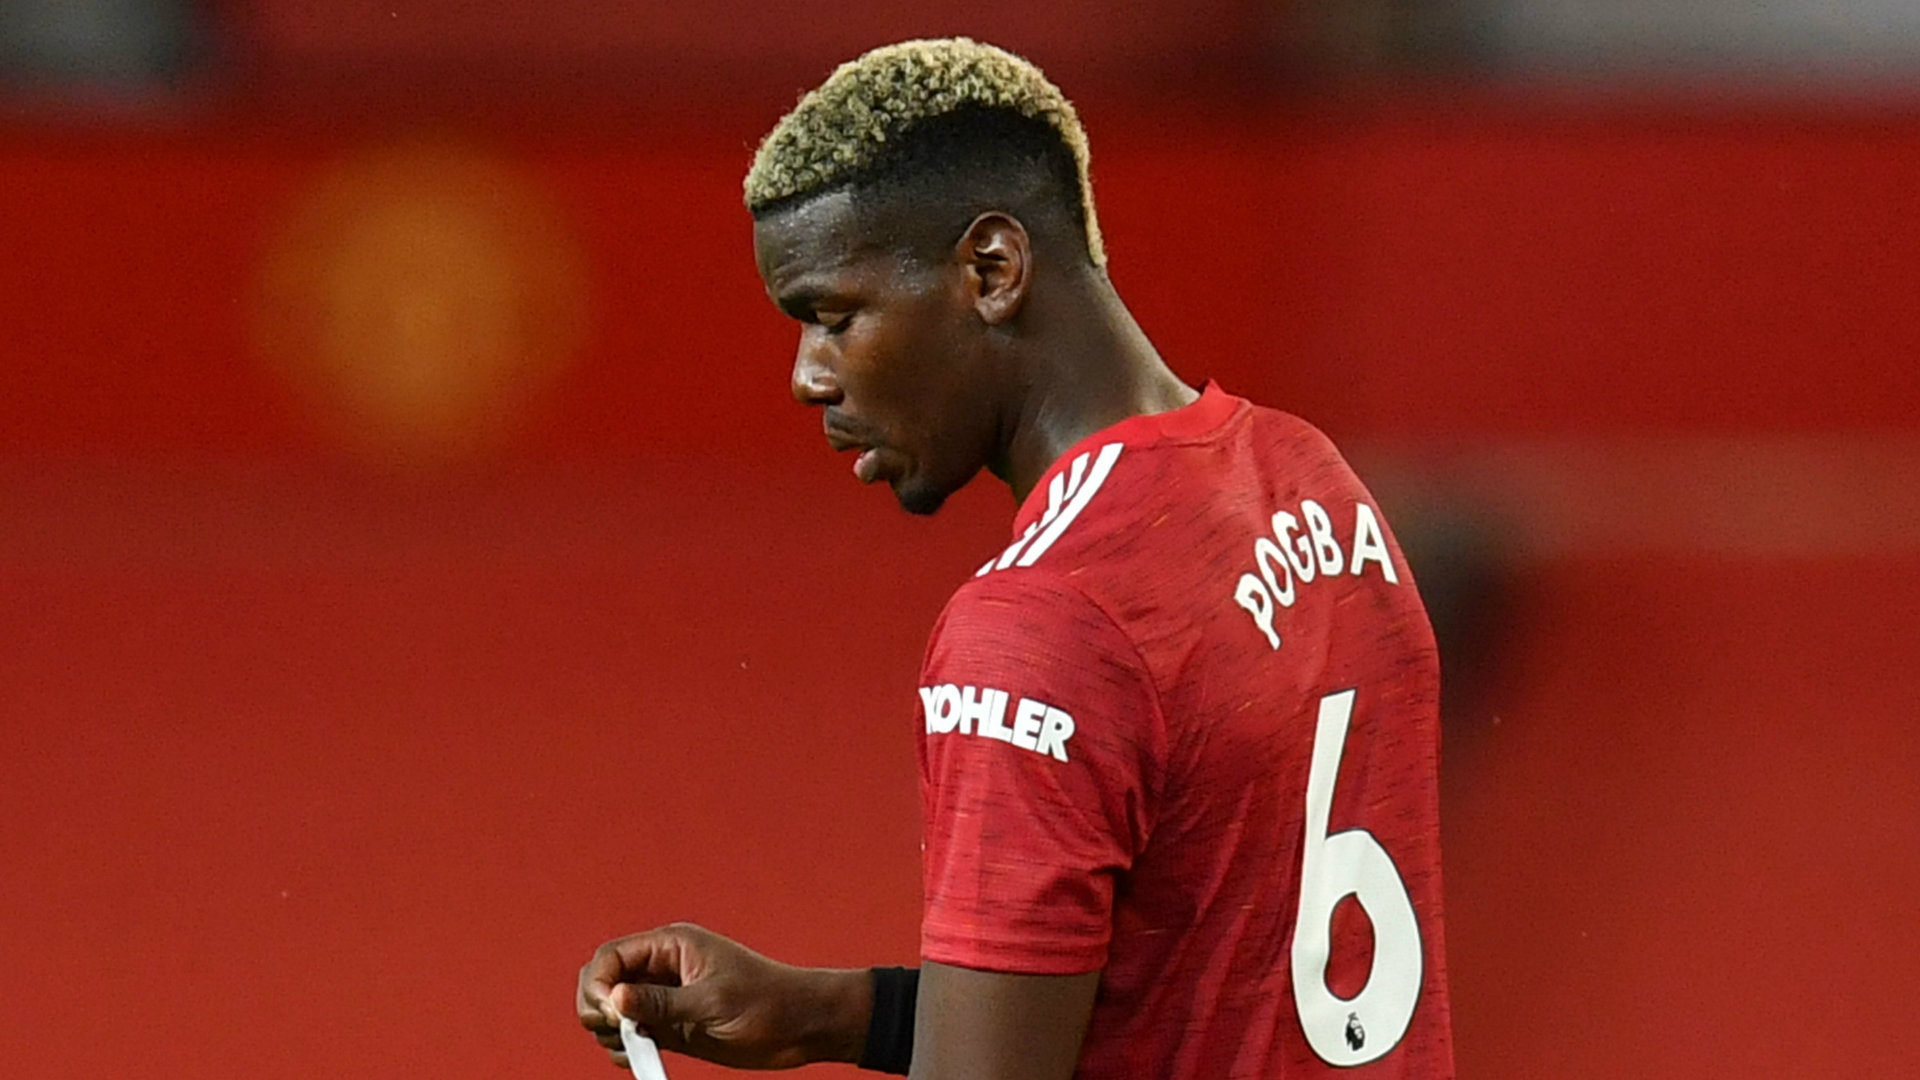 Solskjaer explains why Pogba is not in the Man Utd squad to face West Brom